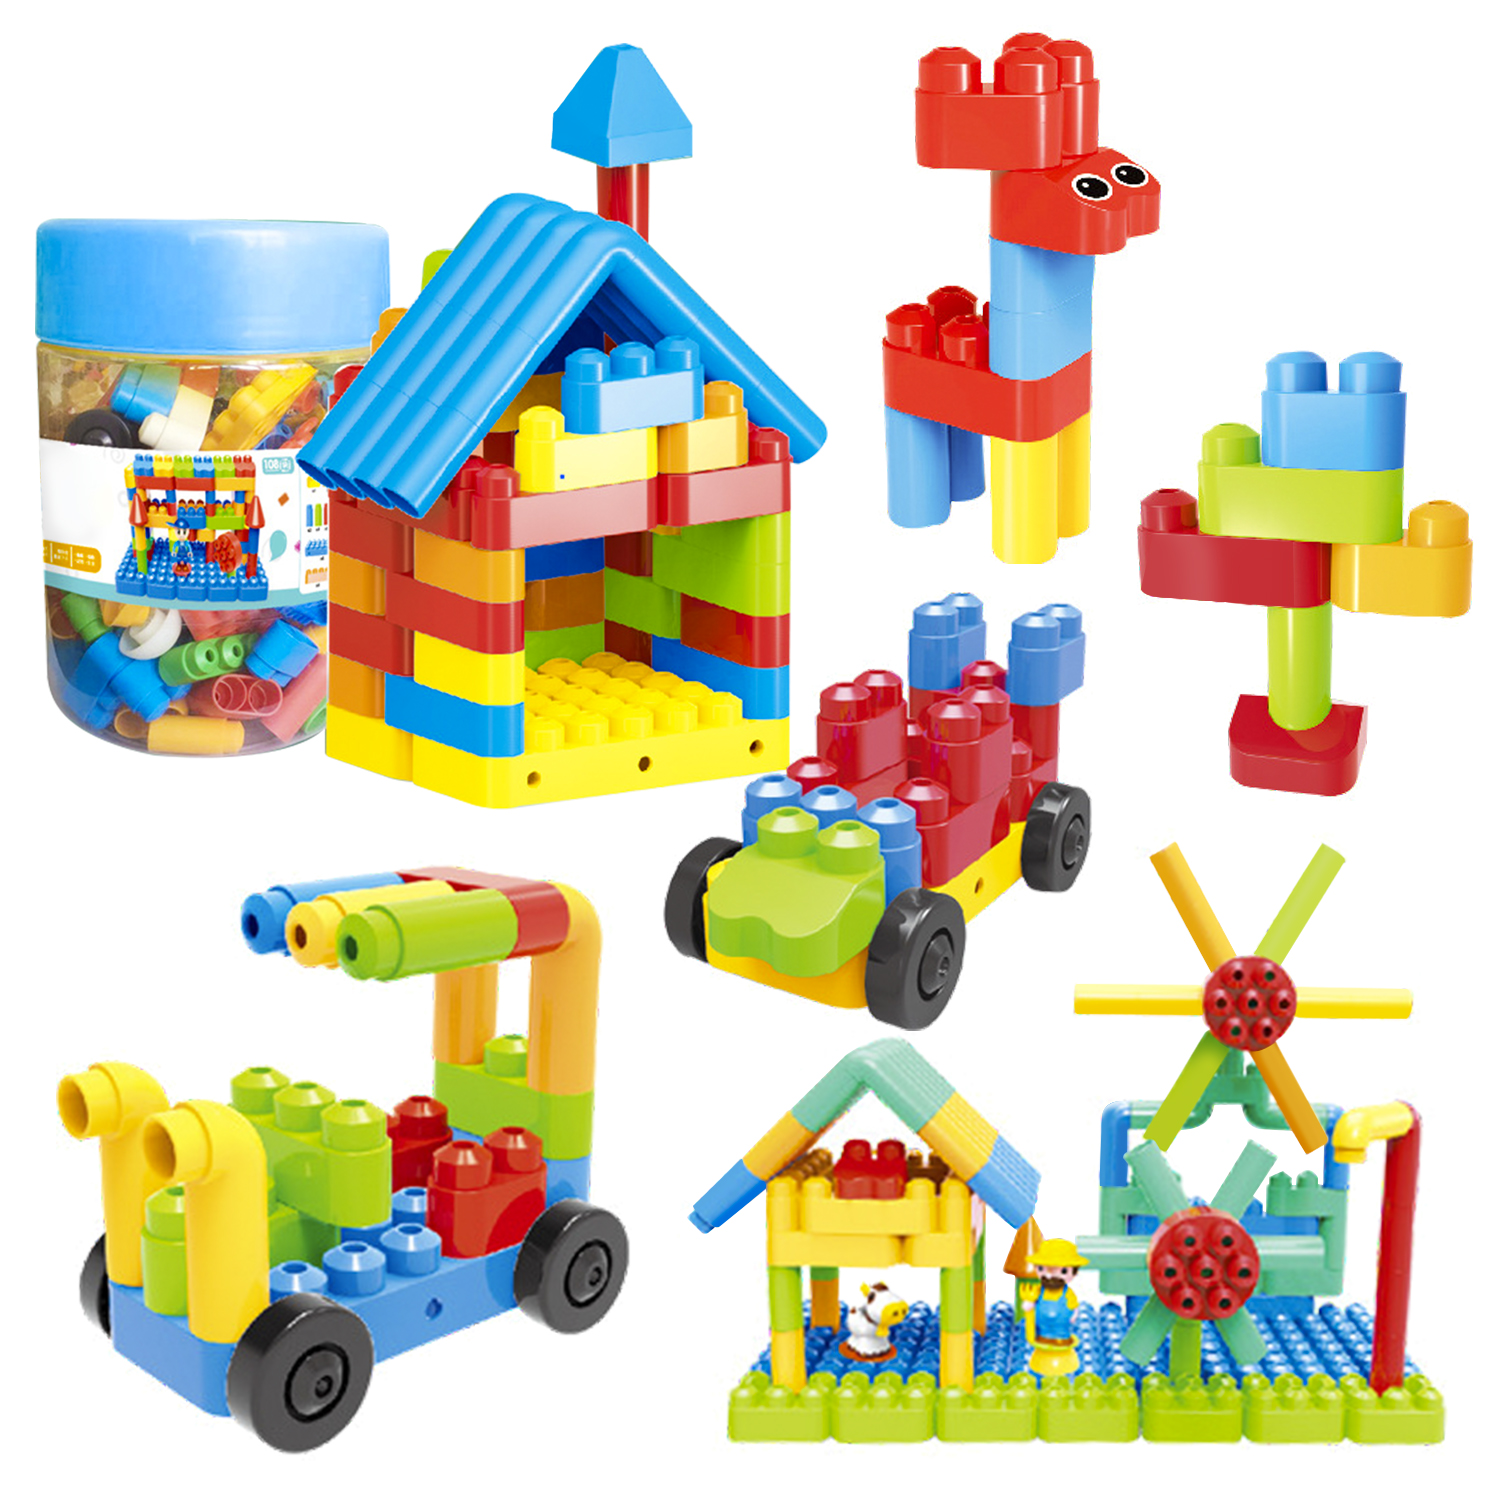 Construction Toys for Kids 3+ Years
